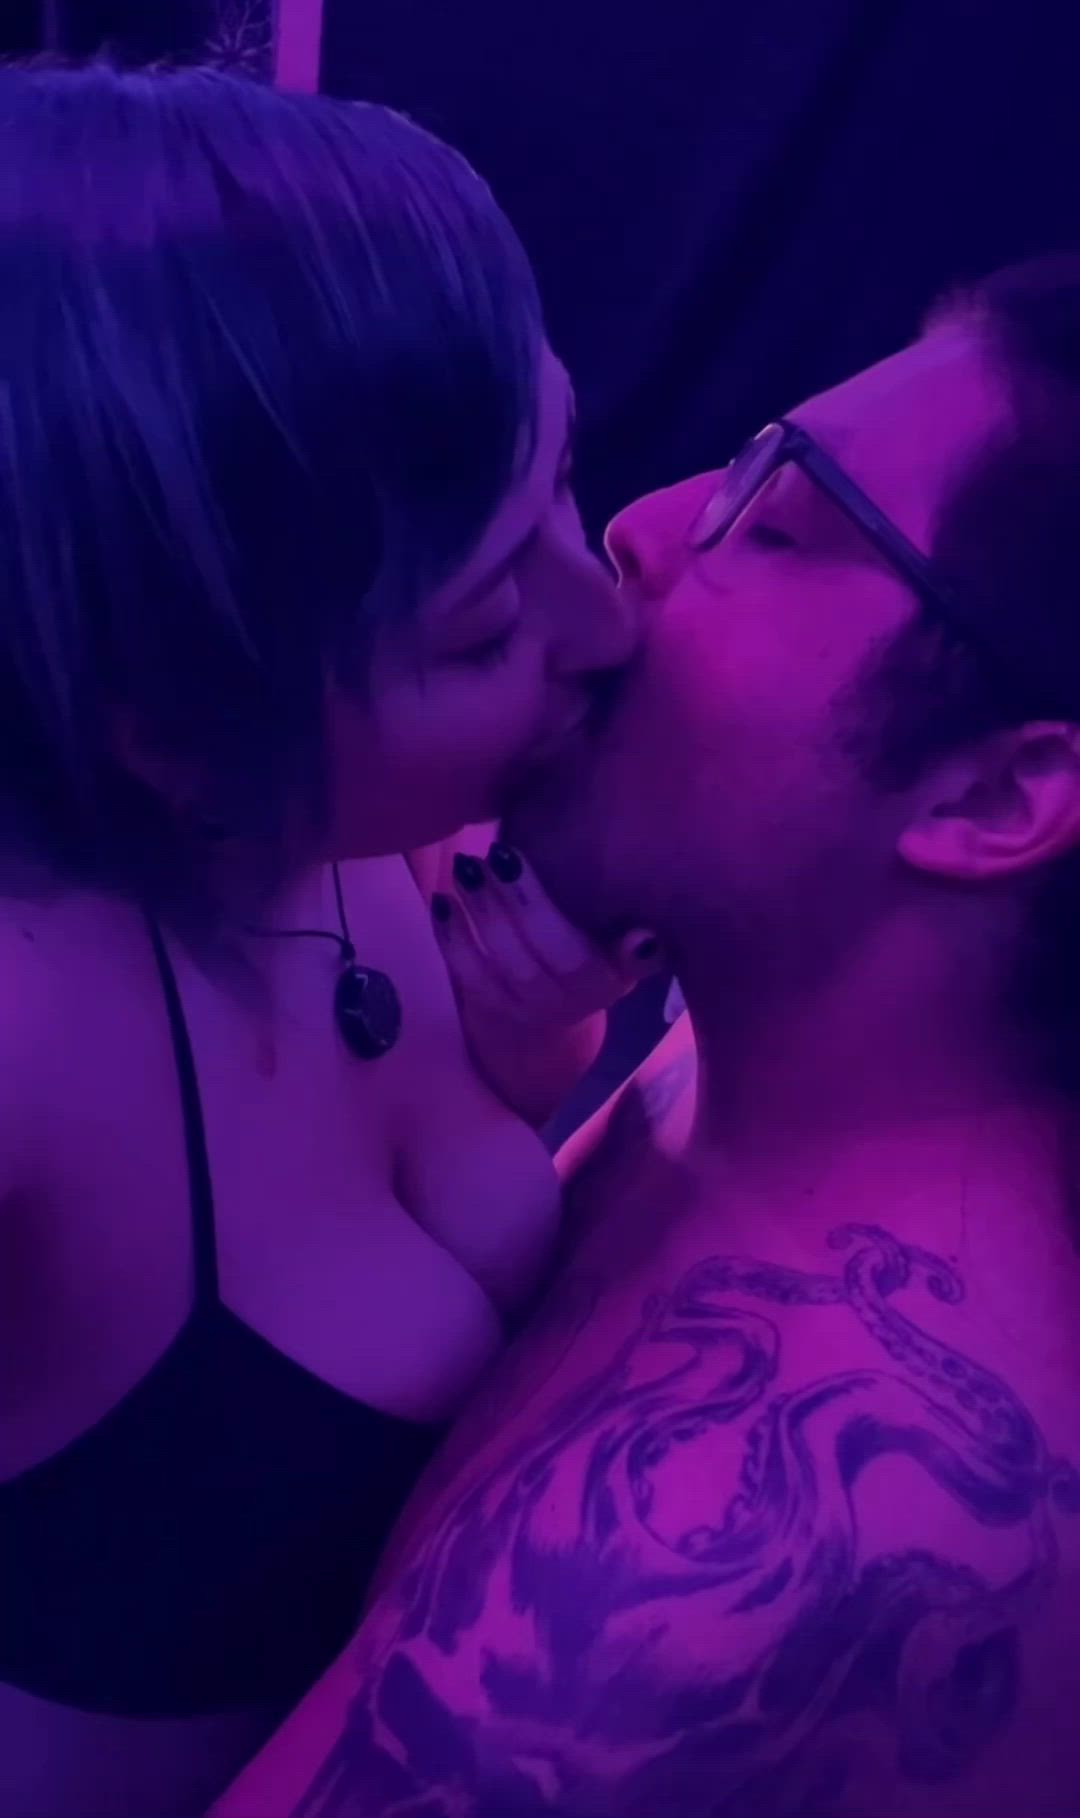 Kissing porn video with onlyfans model domisbomb <strong>@domisbomb</strong>